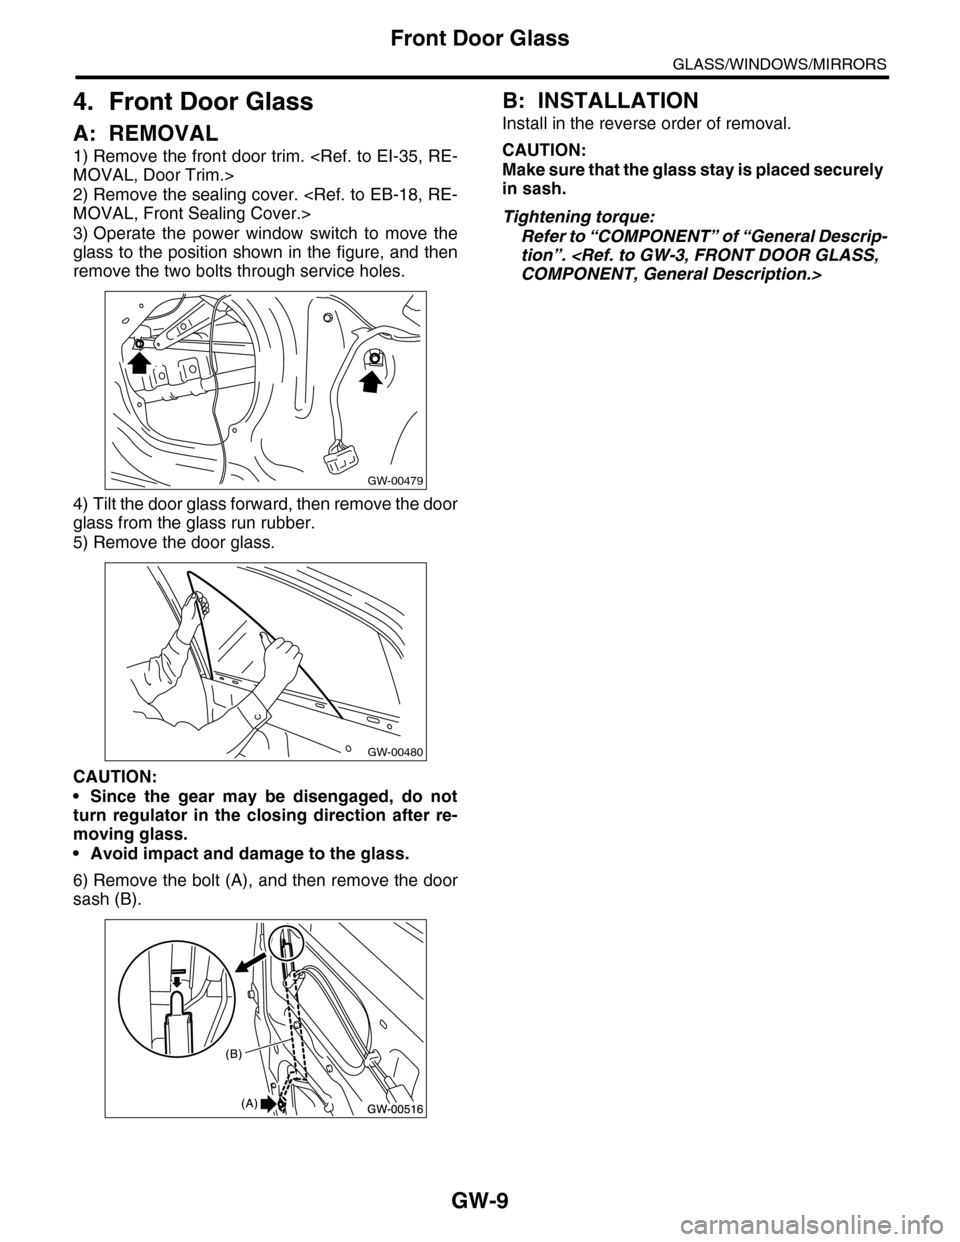 SUBARU TRIBECA 2009 1.G Service Workshop Manual GW-9
Front Door Glass
GLASS/WINDOWS/MIRRORS
4. Front Door Glass
A: REMOVAL
1) Remove the front door trim. <Ref. to EI-35, RE-
MOVAL, Door Trim.>
2) Remove the sealing cover. <Ref. to EB-18, RE-
MOVAL,